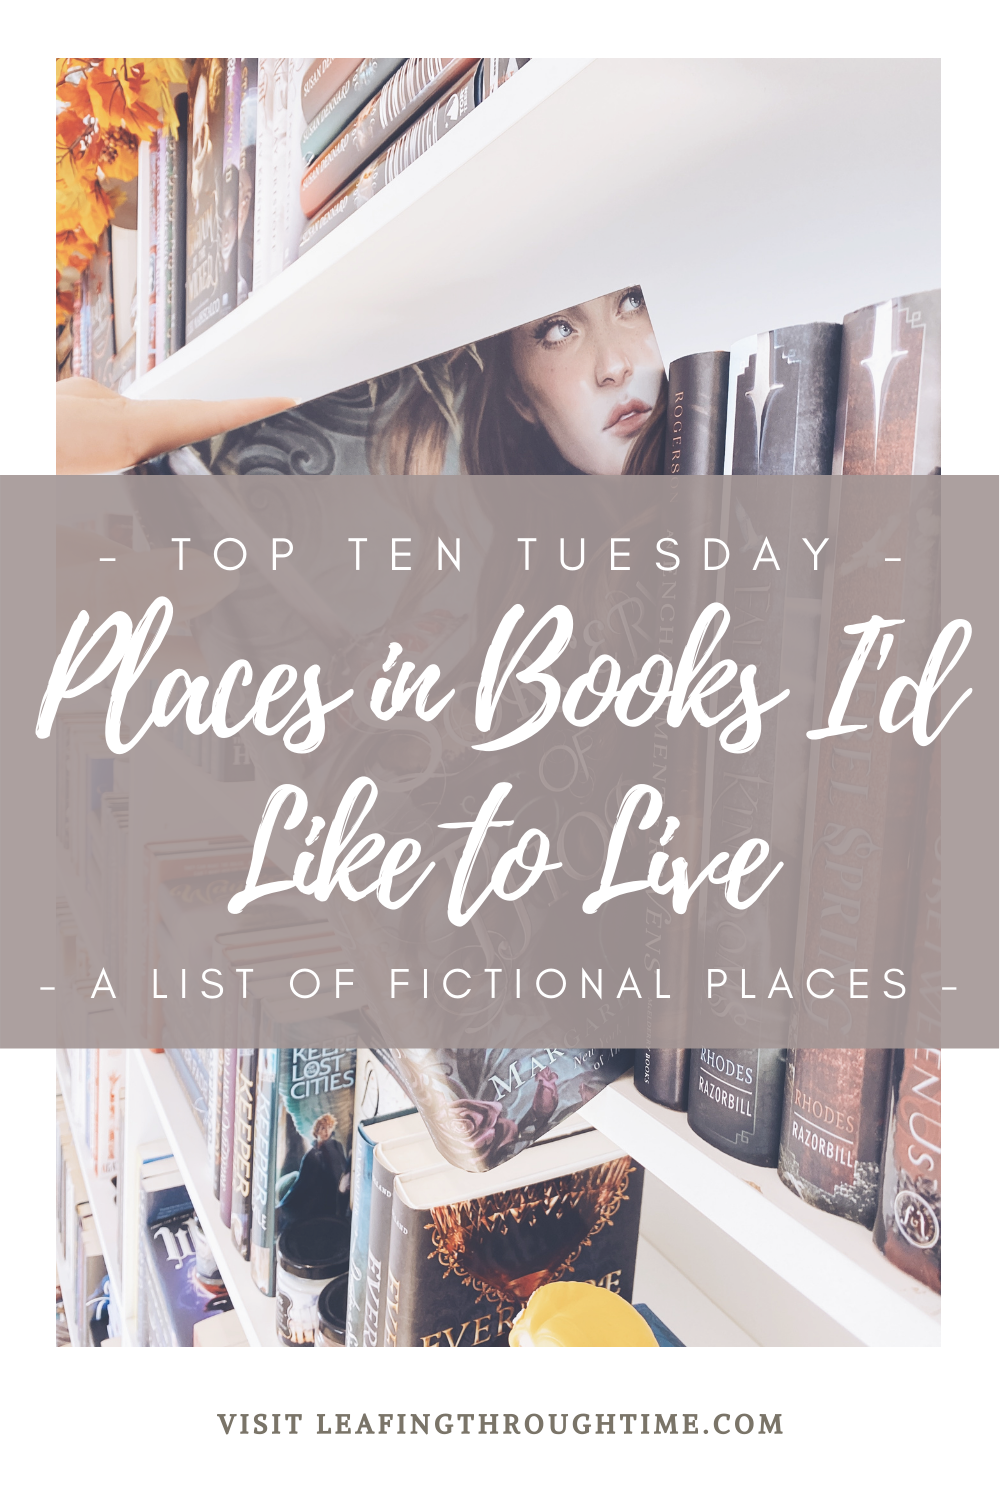 TTT – Places in Books I’d Like to Live